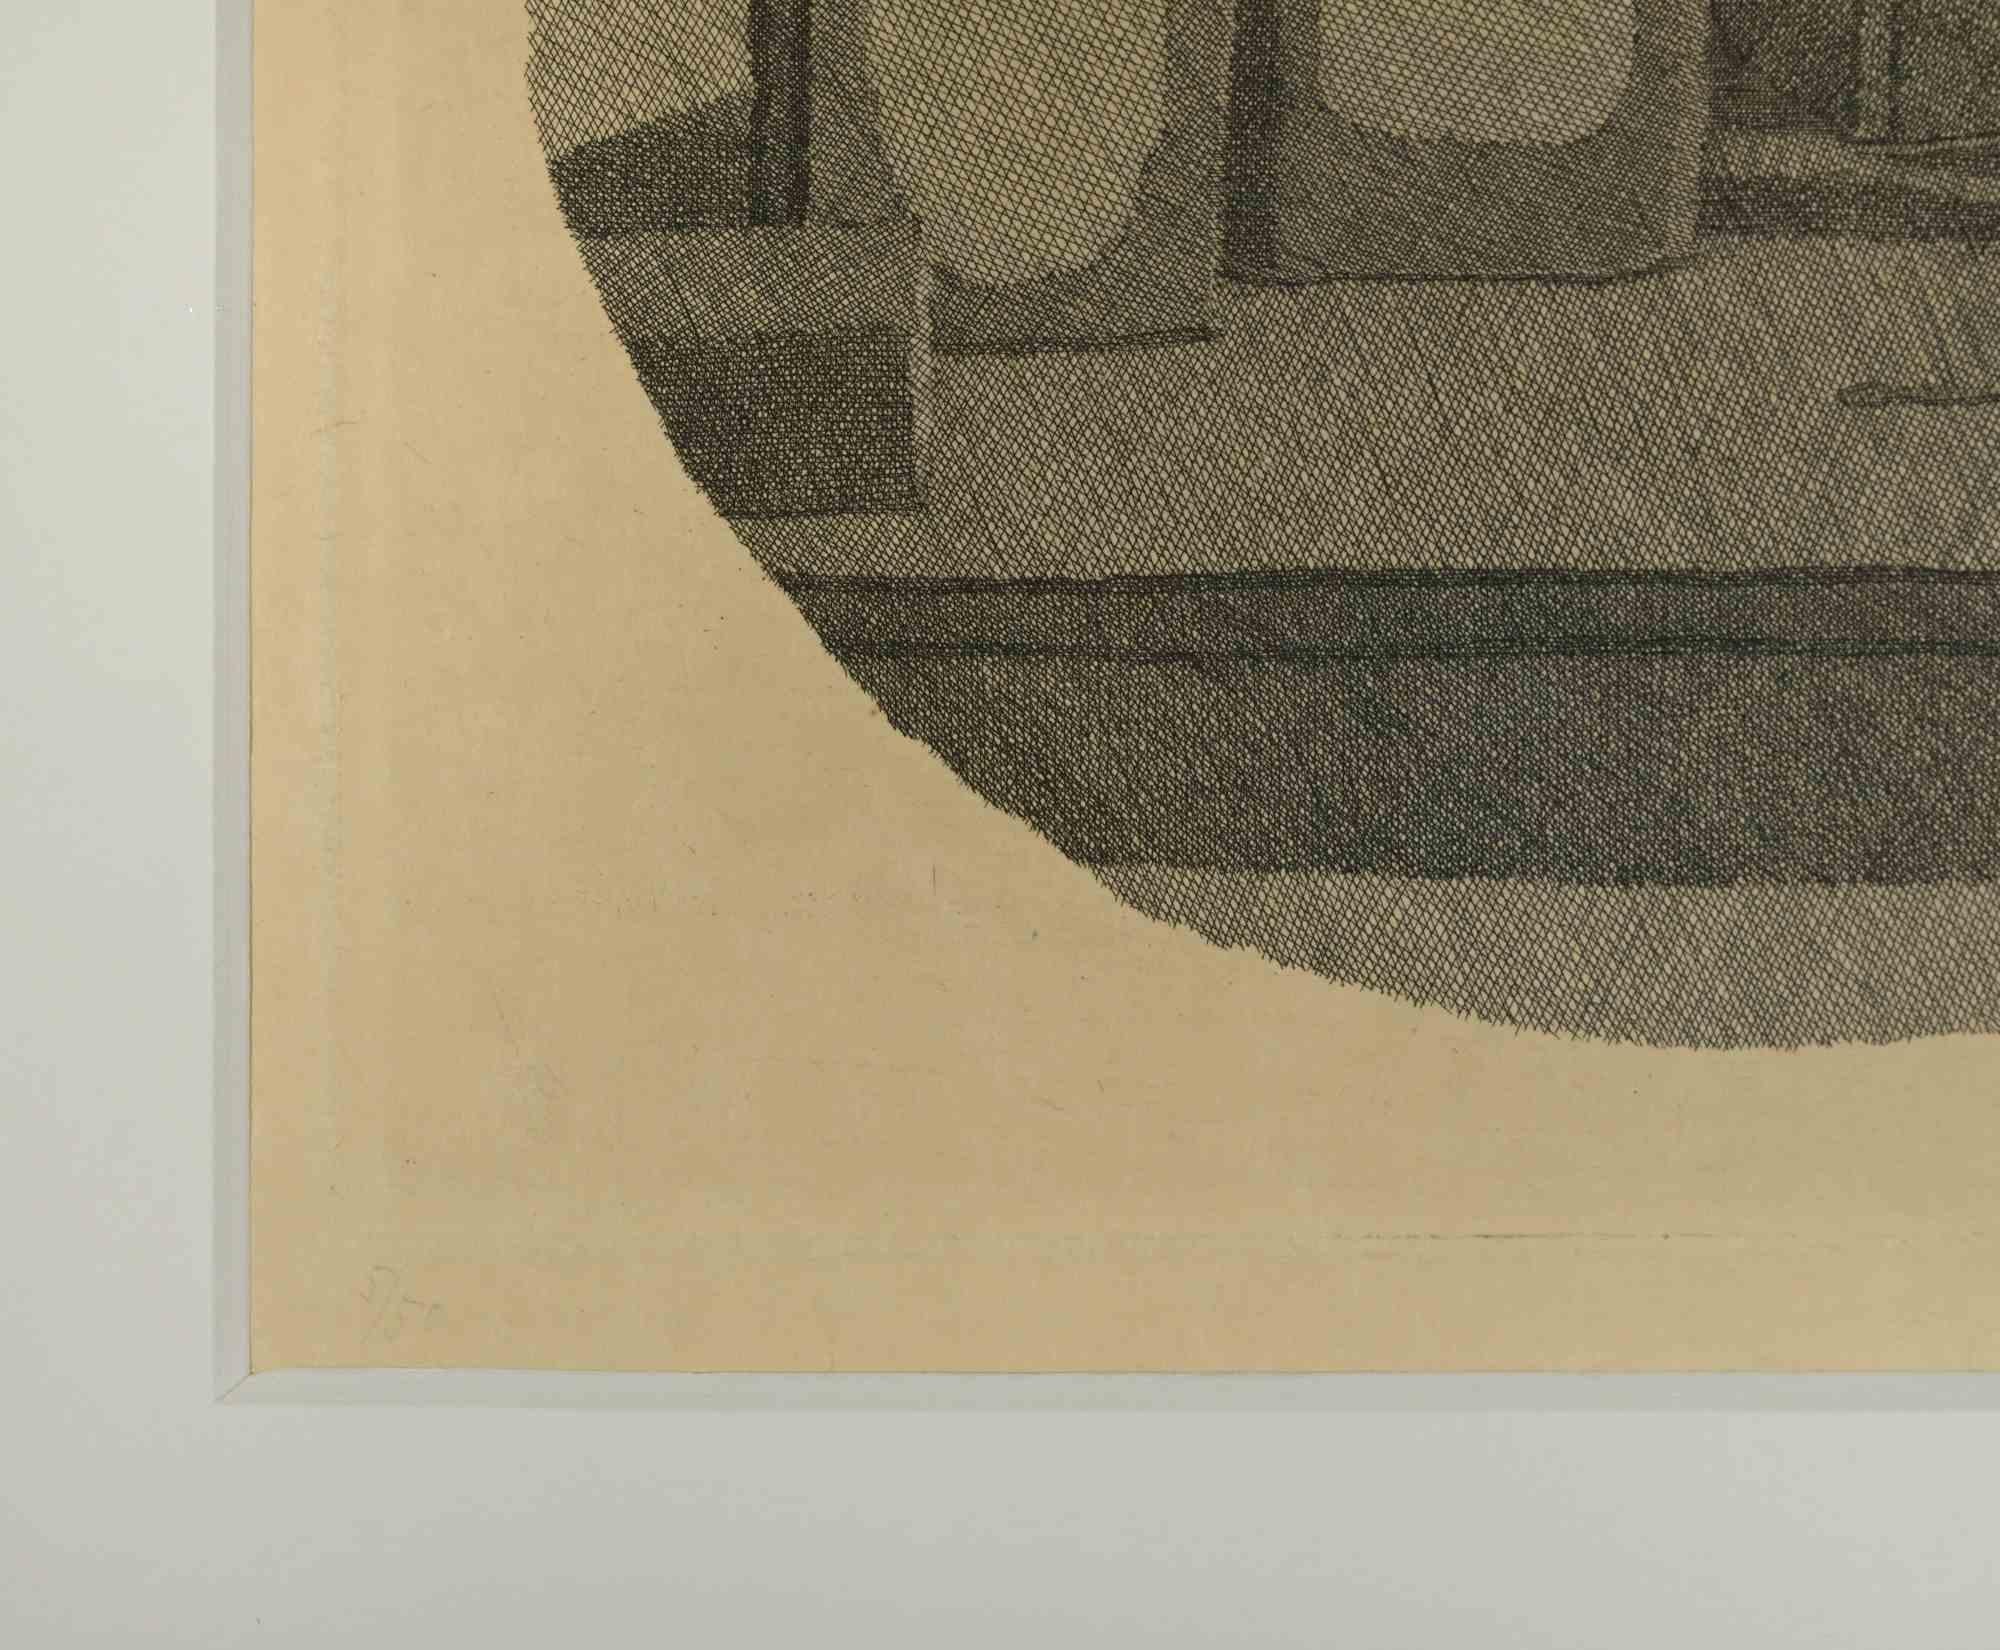 Still life with eleven objetcs in a sphere (Original Italian title: Natura morta in un tondo) is an etching realized by Giorgio Morandi (1890-1964) in 1942. 

Hand numbered Edition 5/50 edited by Galleria del Milione, Milan. 

Hand signed in the